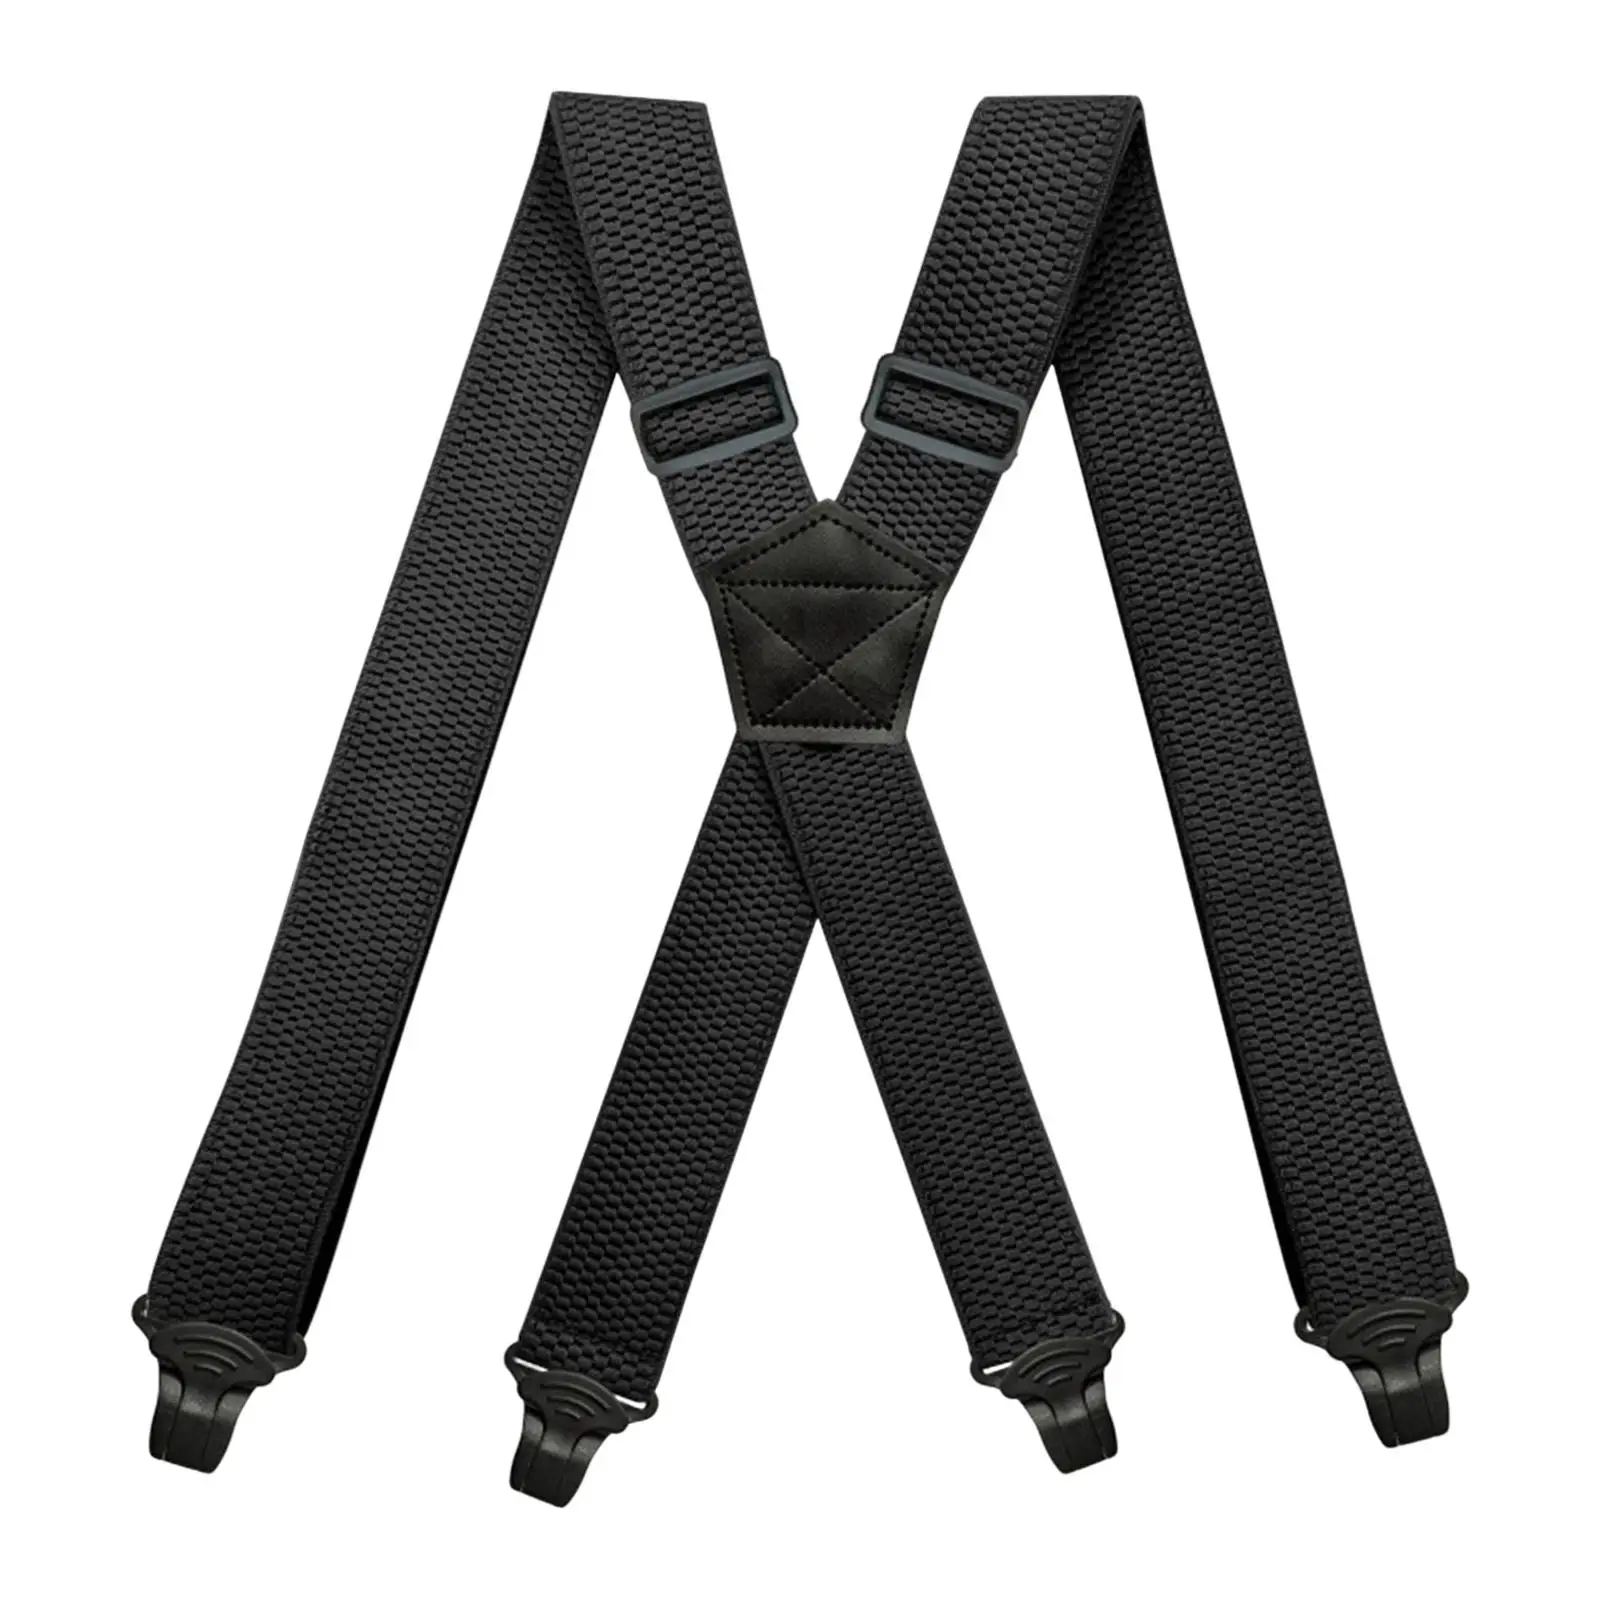 Mens Womens Suspender Elastic Straps Adults x Shaped 4 Clips Suspenders Trucker Style Suspenders Clothes Accessories Supplies